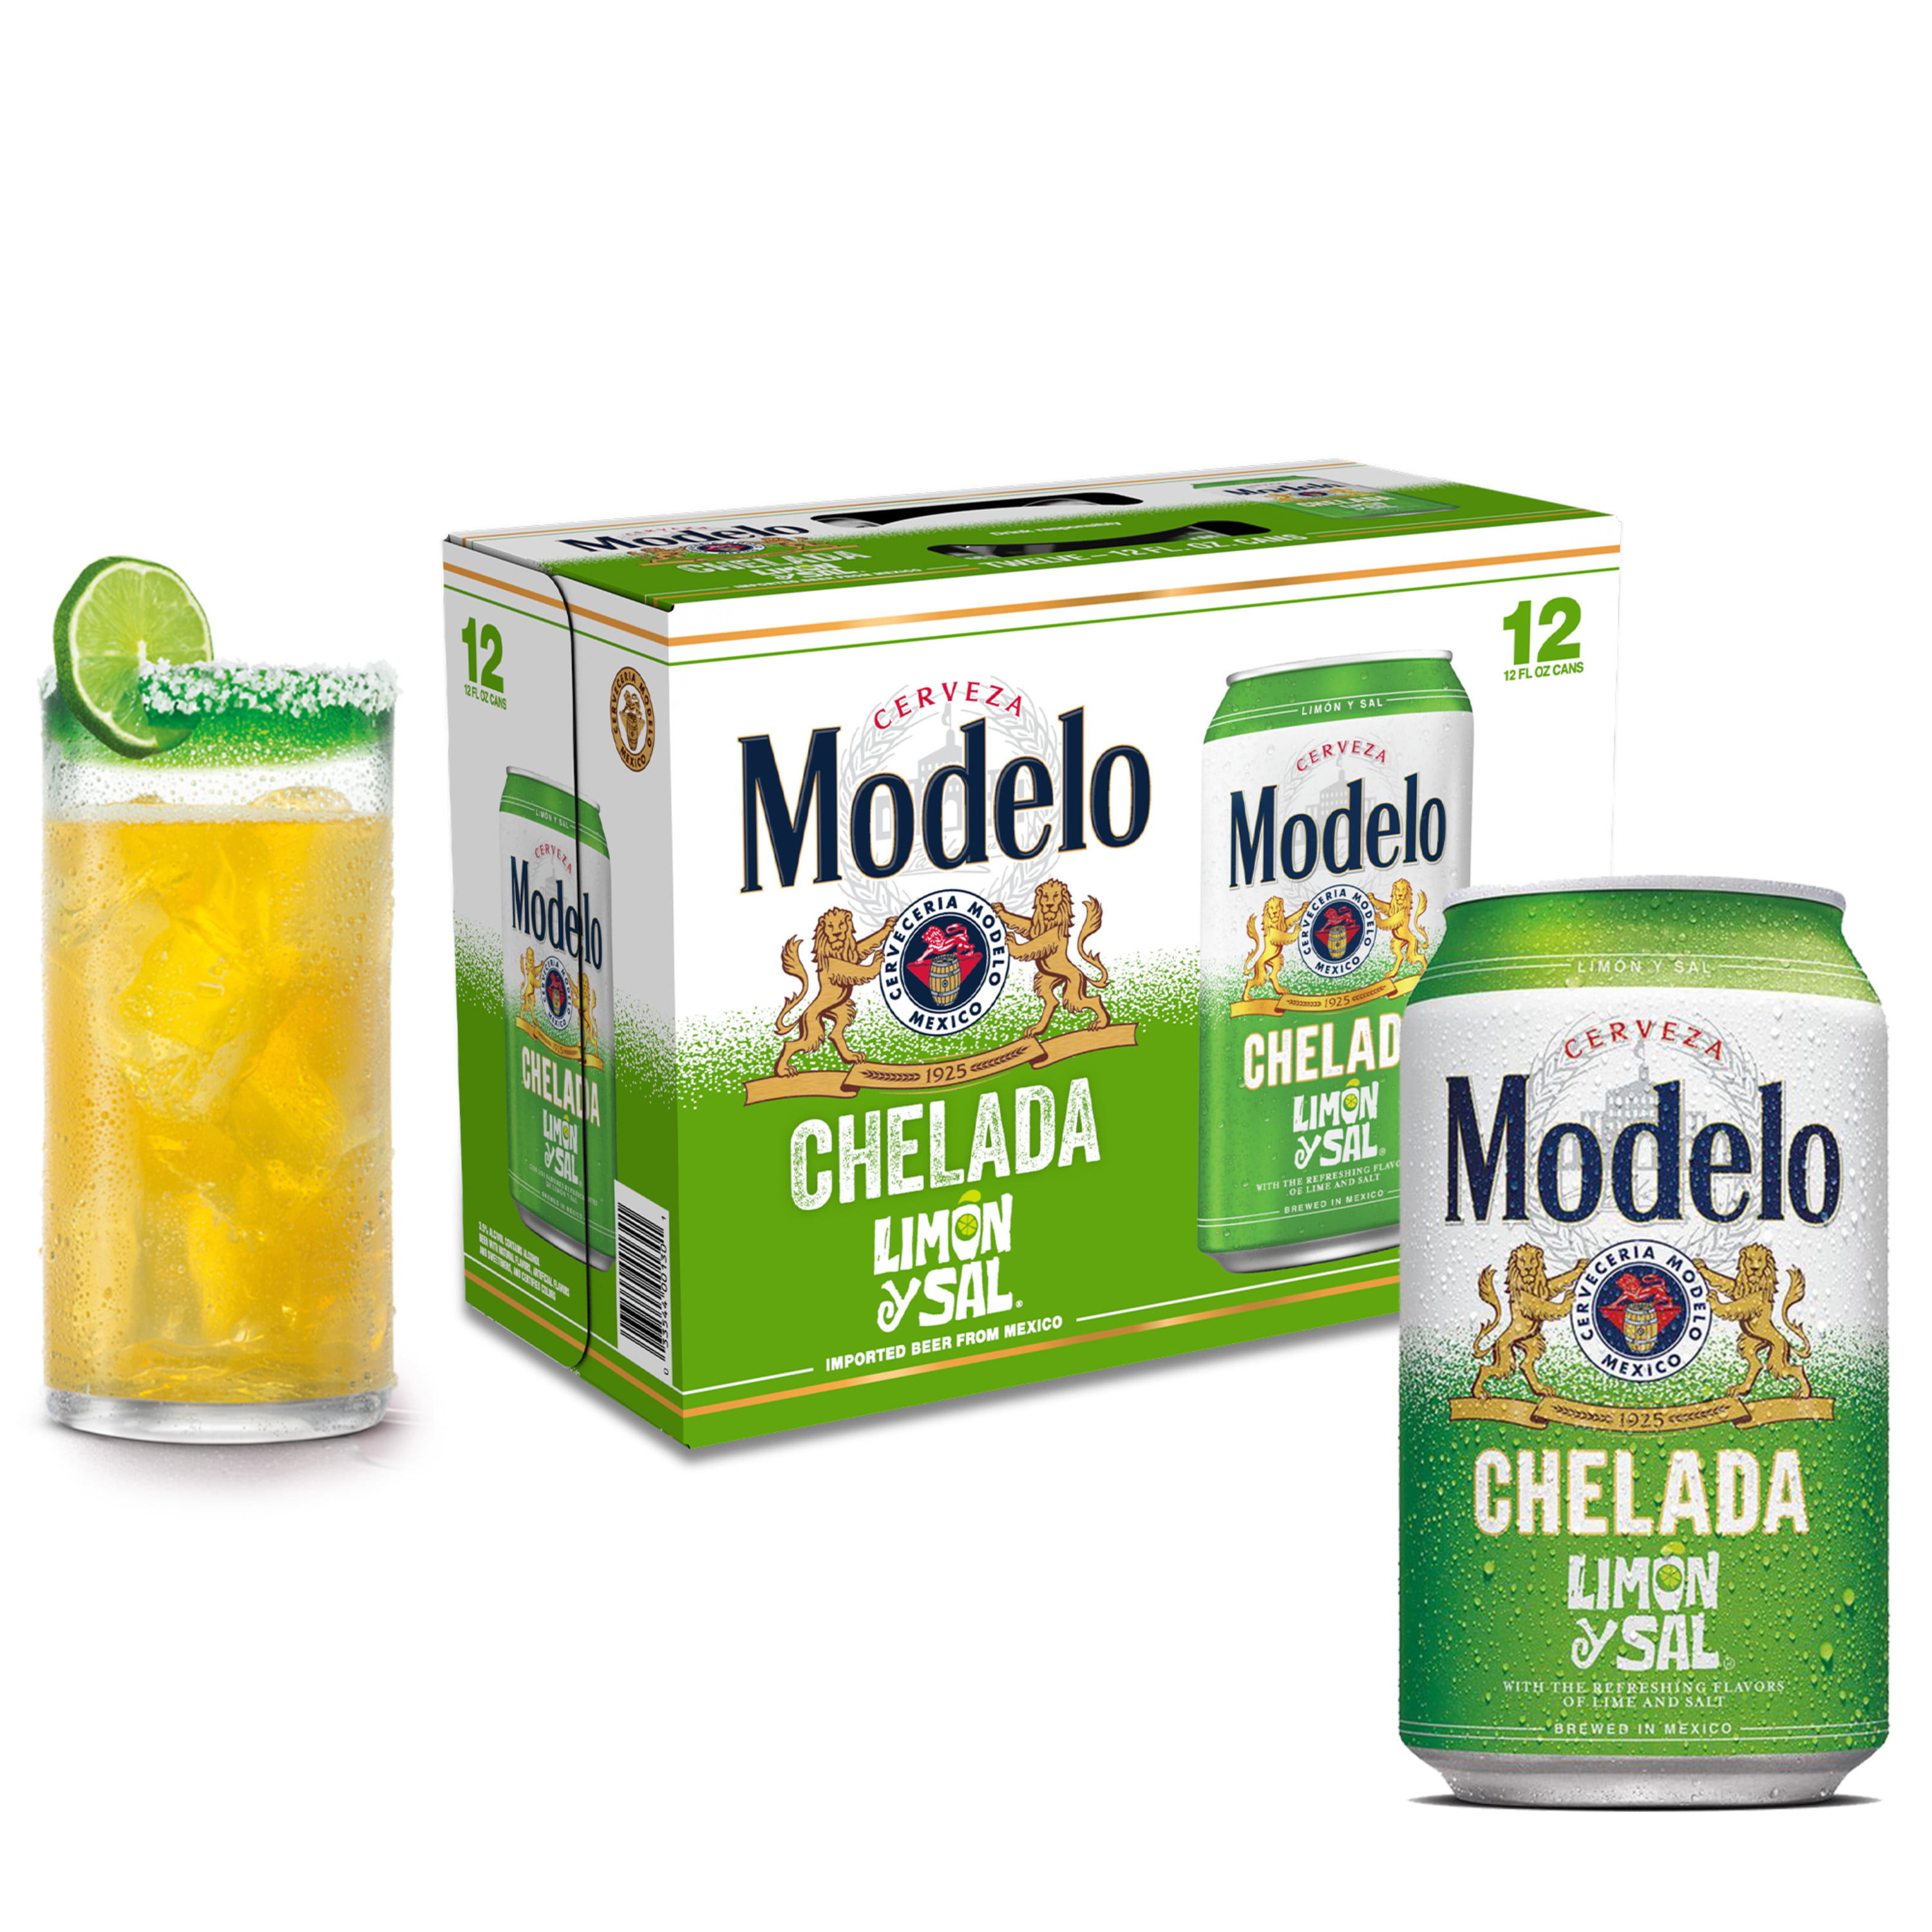 Modelo Chelada Limon y Sal Mexican Import Flavored Beer, Beer 12 Pack, 12  fl oz Cans, % ABV 